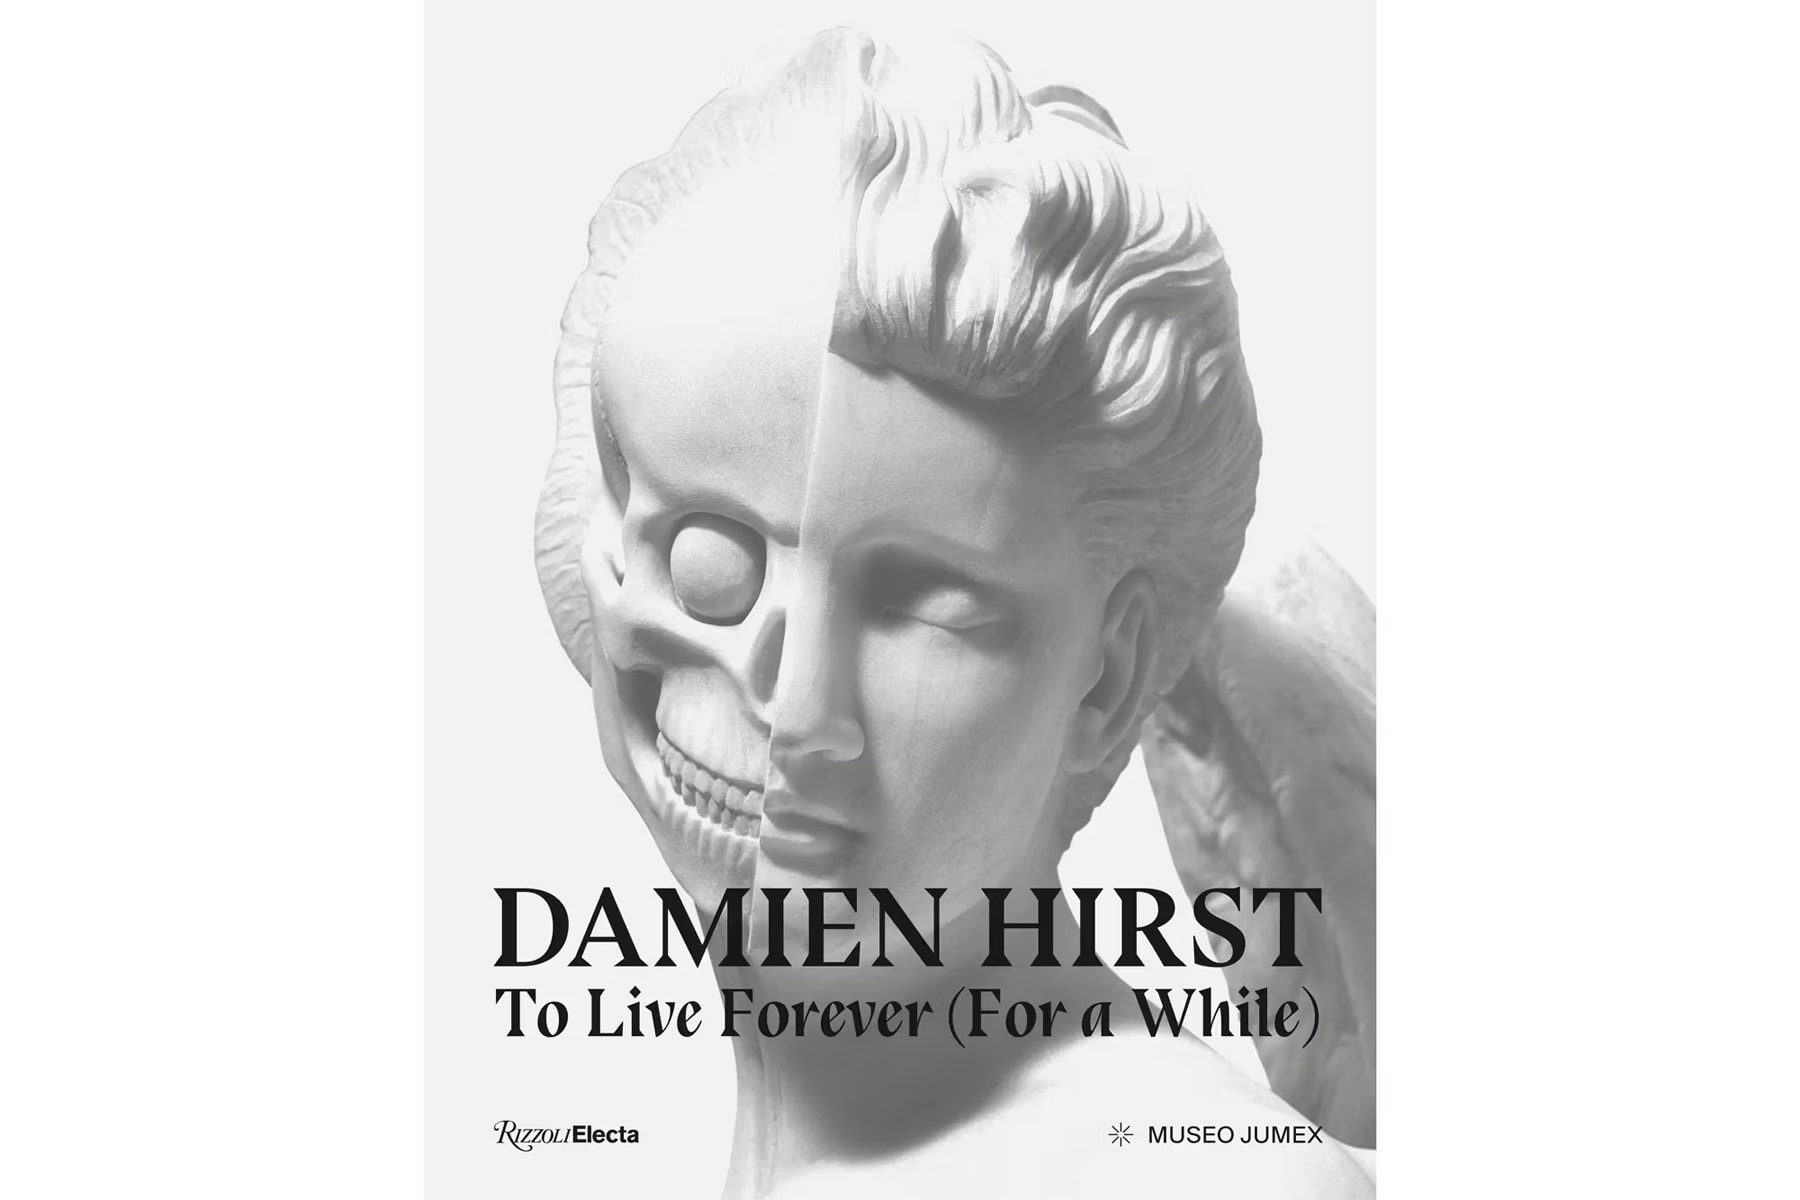 Rizzoli 攜手 Damien Hirst 推出全新書籍《Damien Hirst, To Live Forever (For a While)》